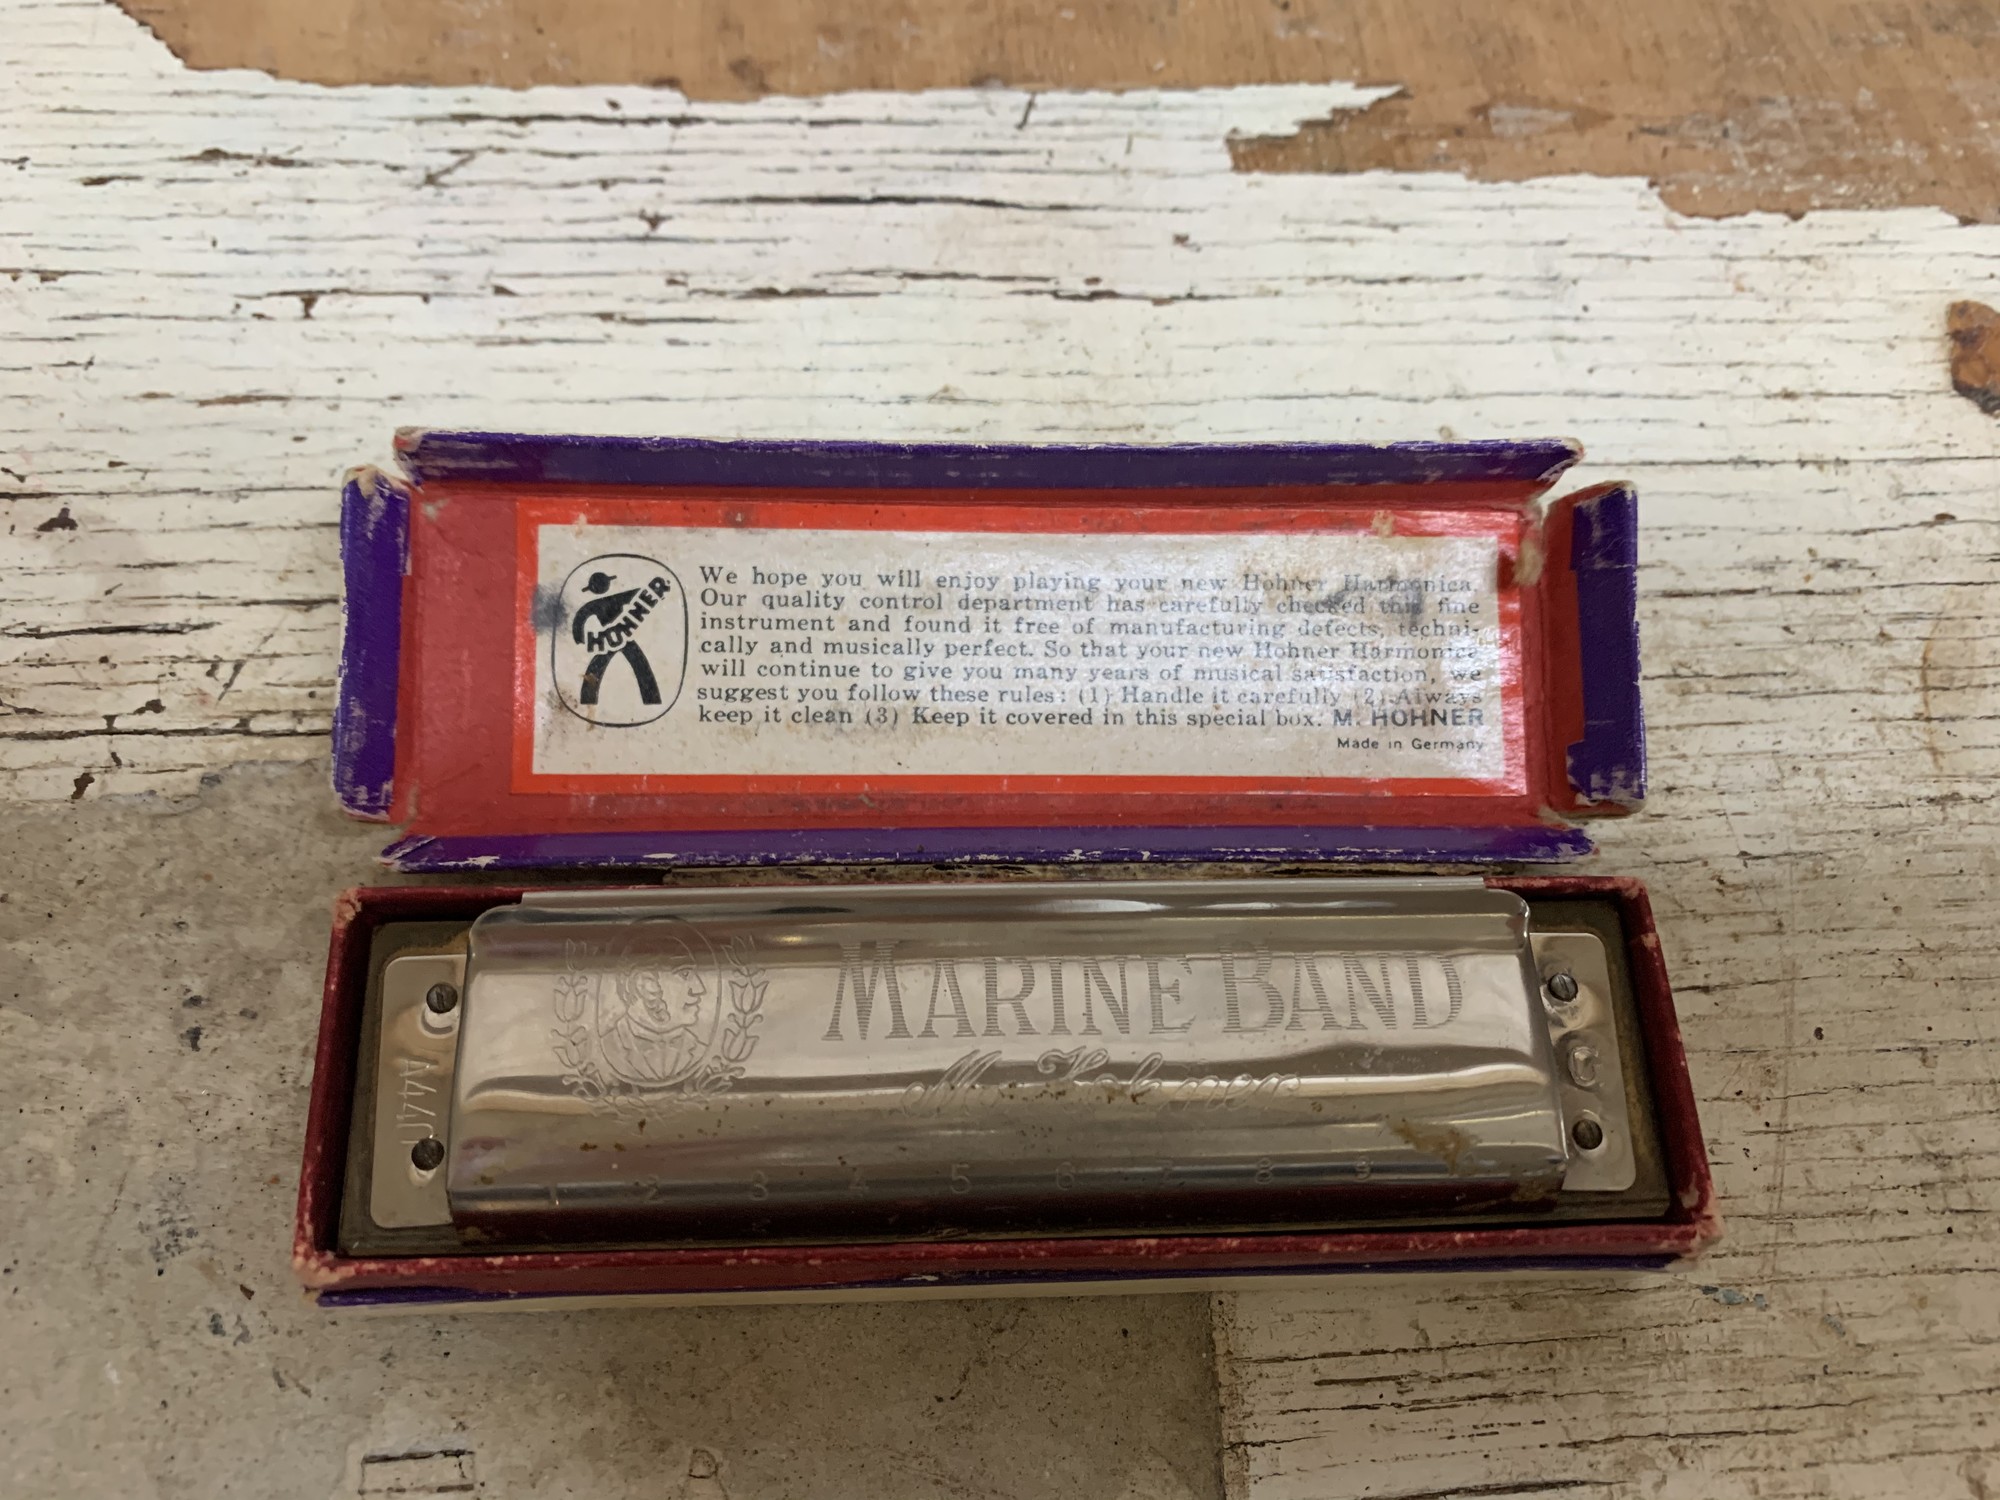 Comes with original box, box is in fair condition, have lots of tiers. Please make sure to look at all the pictures for a closer visual. Measures approx 4 1/4''  x 1 1/4'' x 1''

Harmonica have some visual, rust, scratches, some dirt inside in it. I have never played harmonicas, but it does make a sound. Measures approx 4'' x 1'' x 3/4''  x

Please note that this item is vintage and you will experience vintage wear.

Thank you.